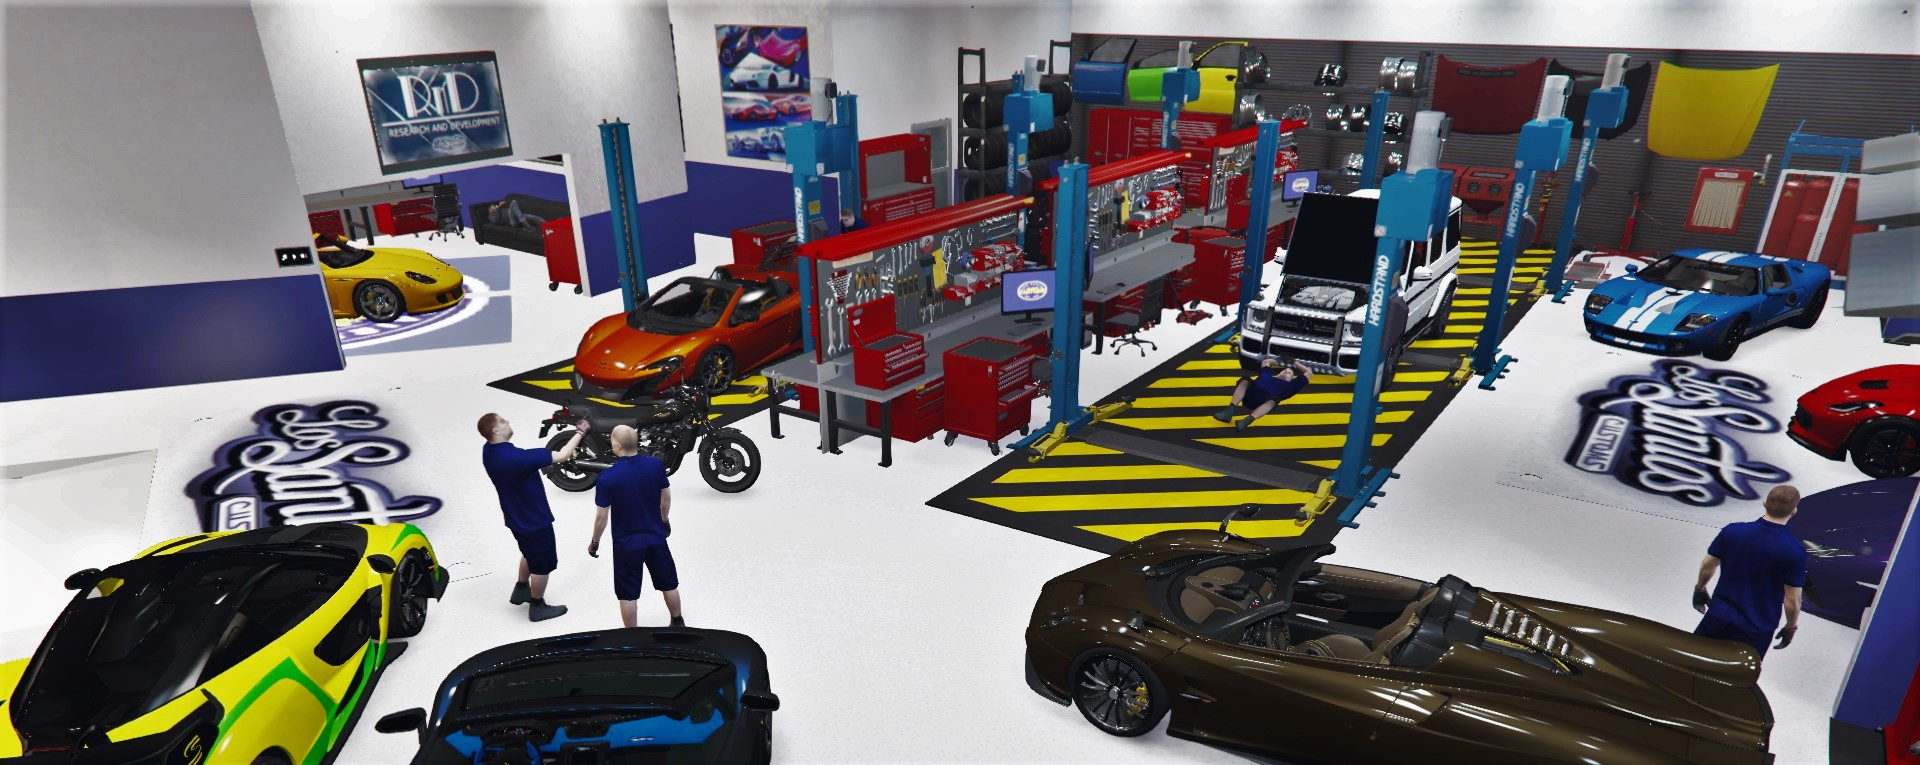 Luxury Los Santos Customs FiveM Ready Luxury Garage With Customisation  Blips Included And Luxury Offices / Esx Ready Map Script Download.